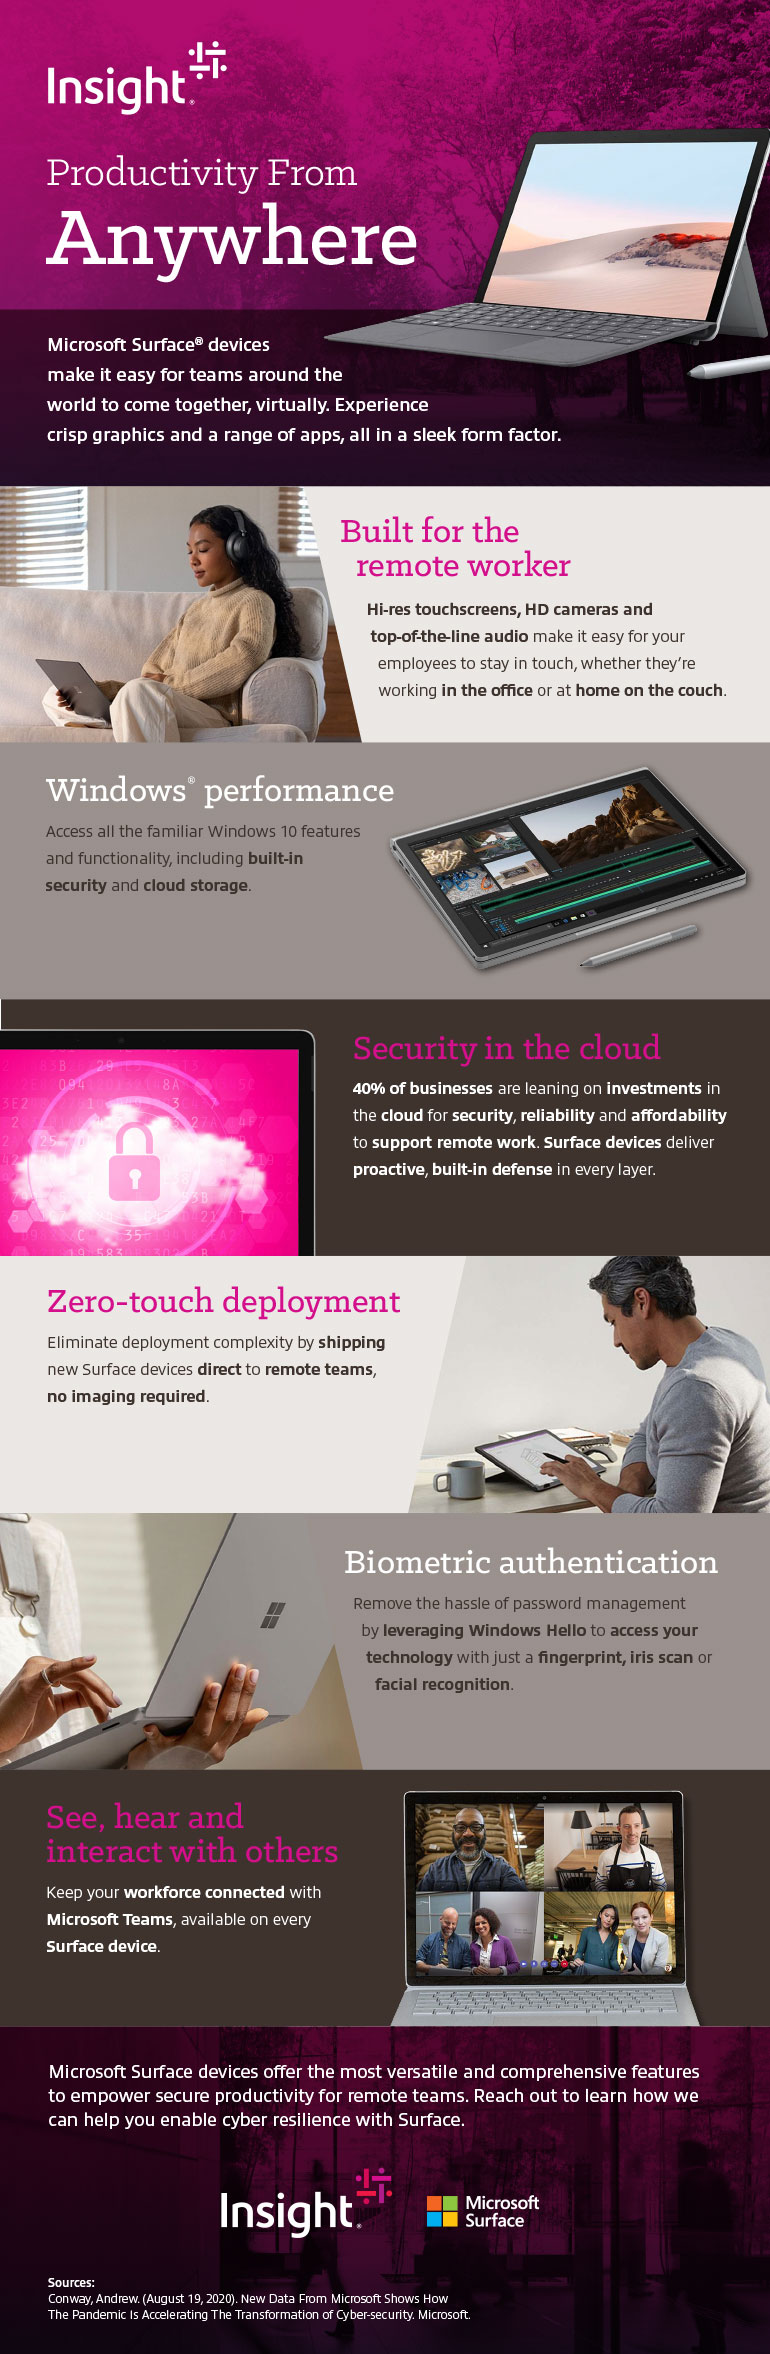 Productivity From Anywhere, Remote Work With Microsoft Surface infographic as transcribed below